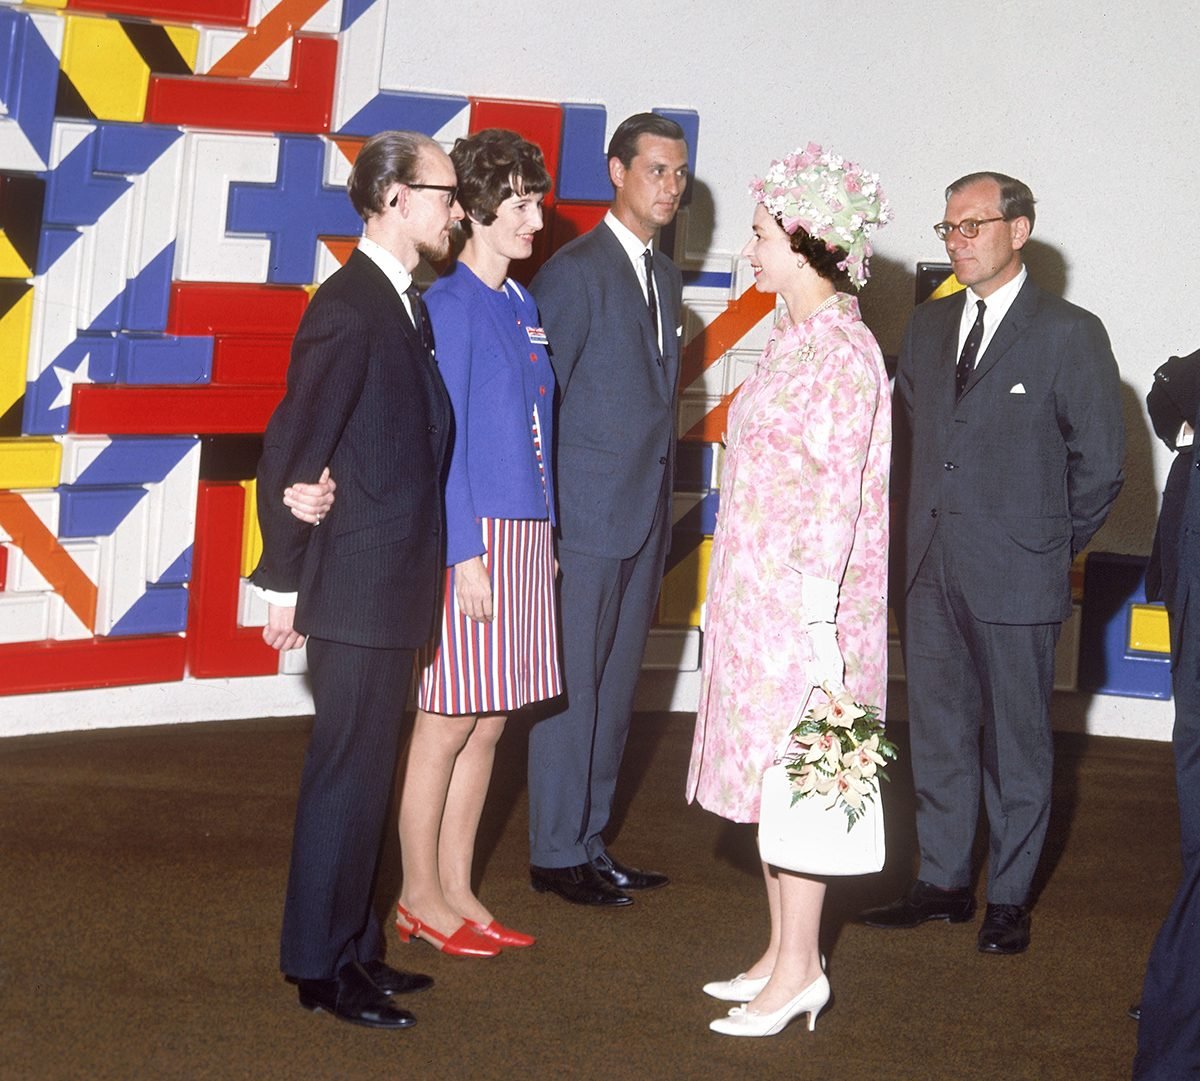 Royal tours of Canada - Queen Elizabeth II at Expo 67 in Montreal 1967